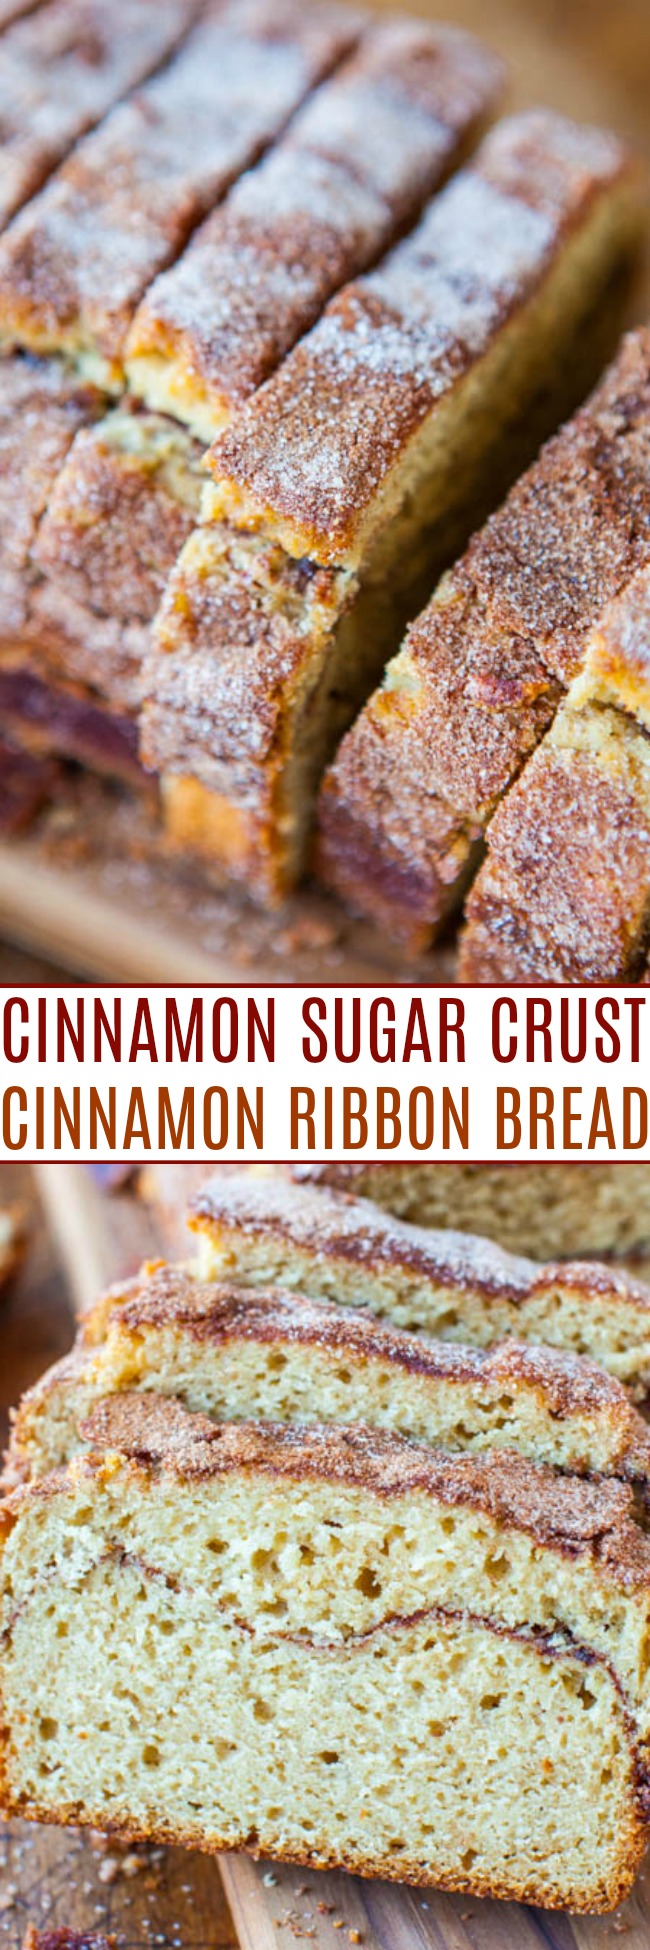 Cinnamon-Sugar Crust Cinnamon Swirl Bread — This cinnamon swirl bread is light and fluffy in the middle with a crusty cinnamon-sugar exterior that's reminiscent of a streusel topping! The ribbon of cinnamon sugar that runs through the middle is a perfect touch! Easy, one-bowl, no-mixer recipe!!